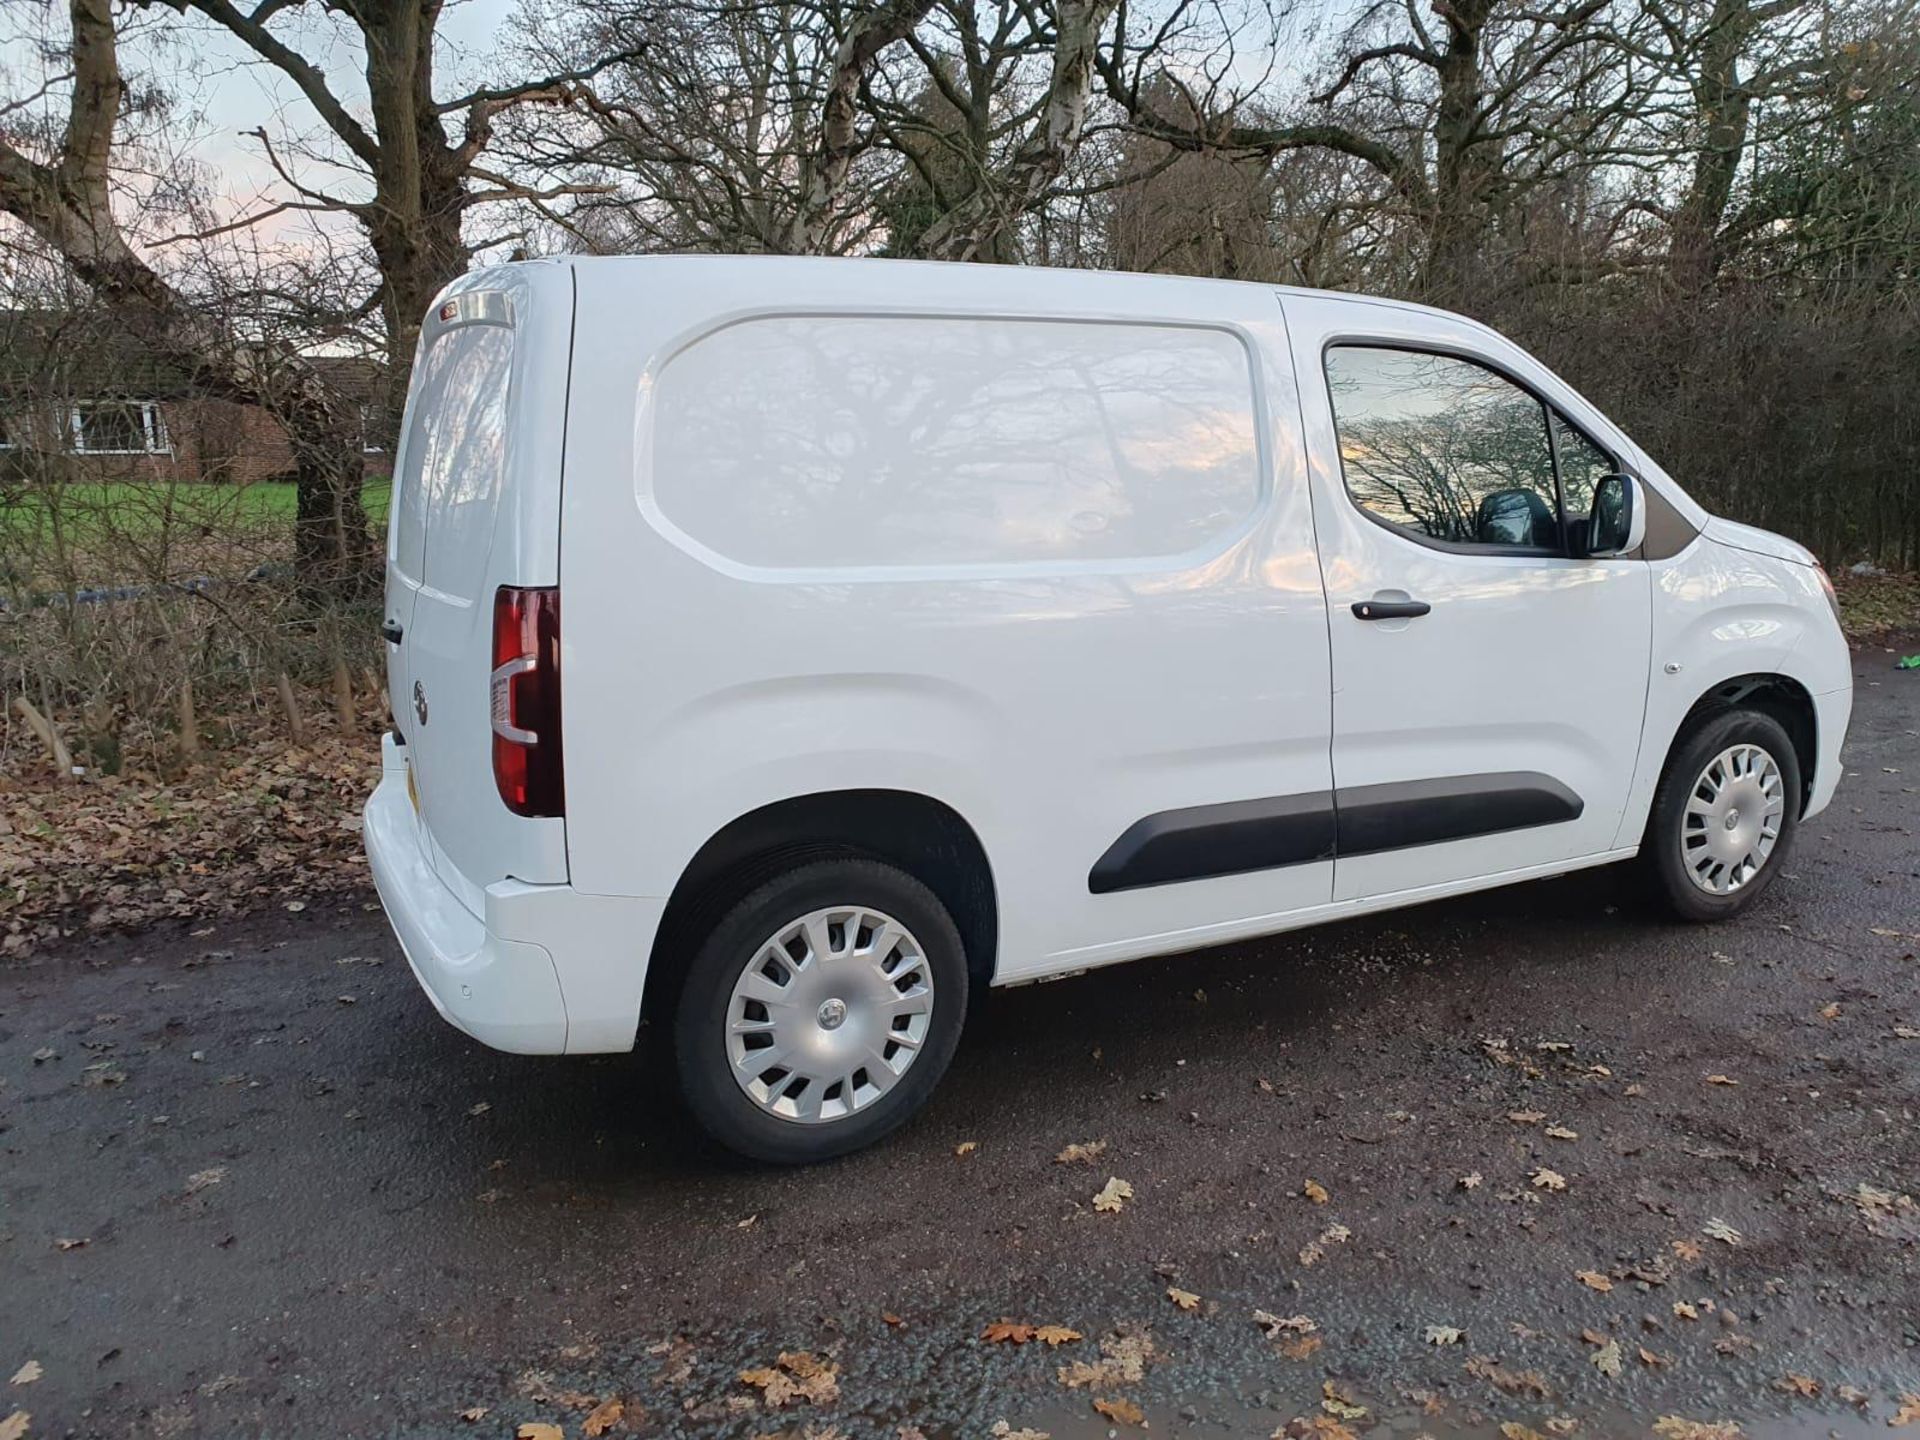 2021 21 Vauxhall combo sportive White panel van - 3 seats - air con - ply lined - 2 keys - VO21 XUR - Image 6 of 7